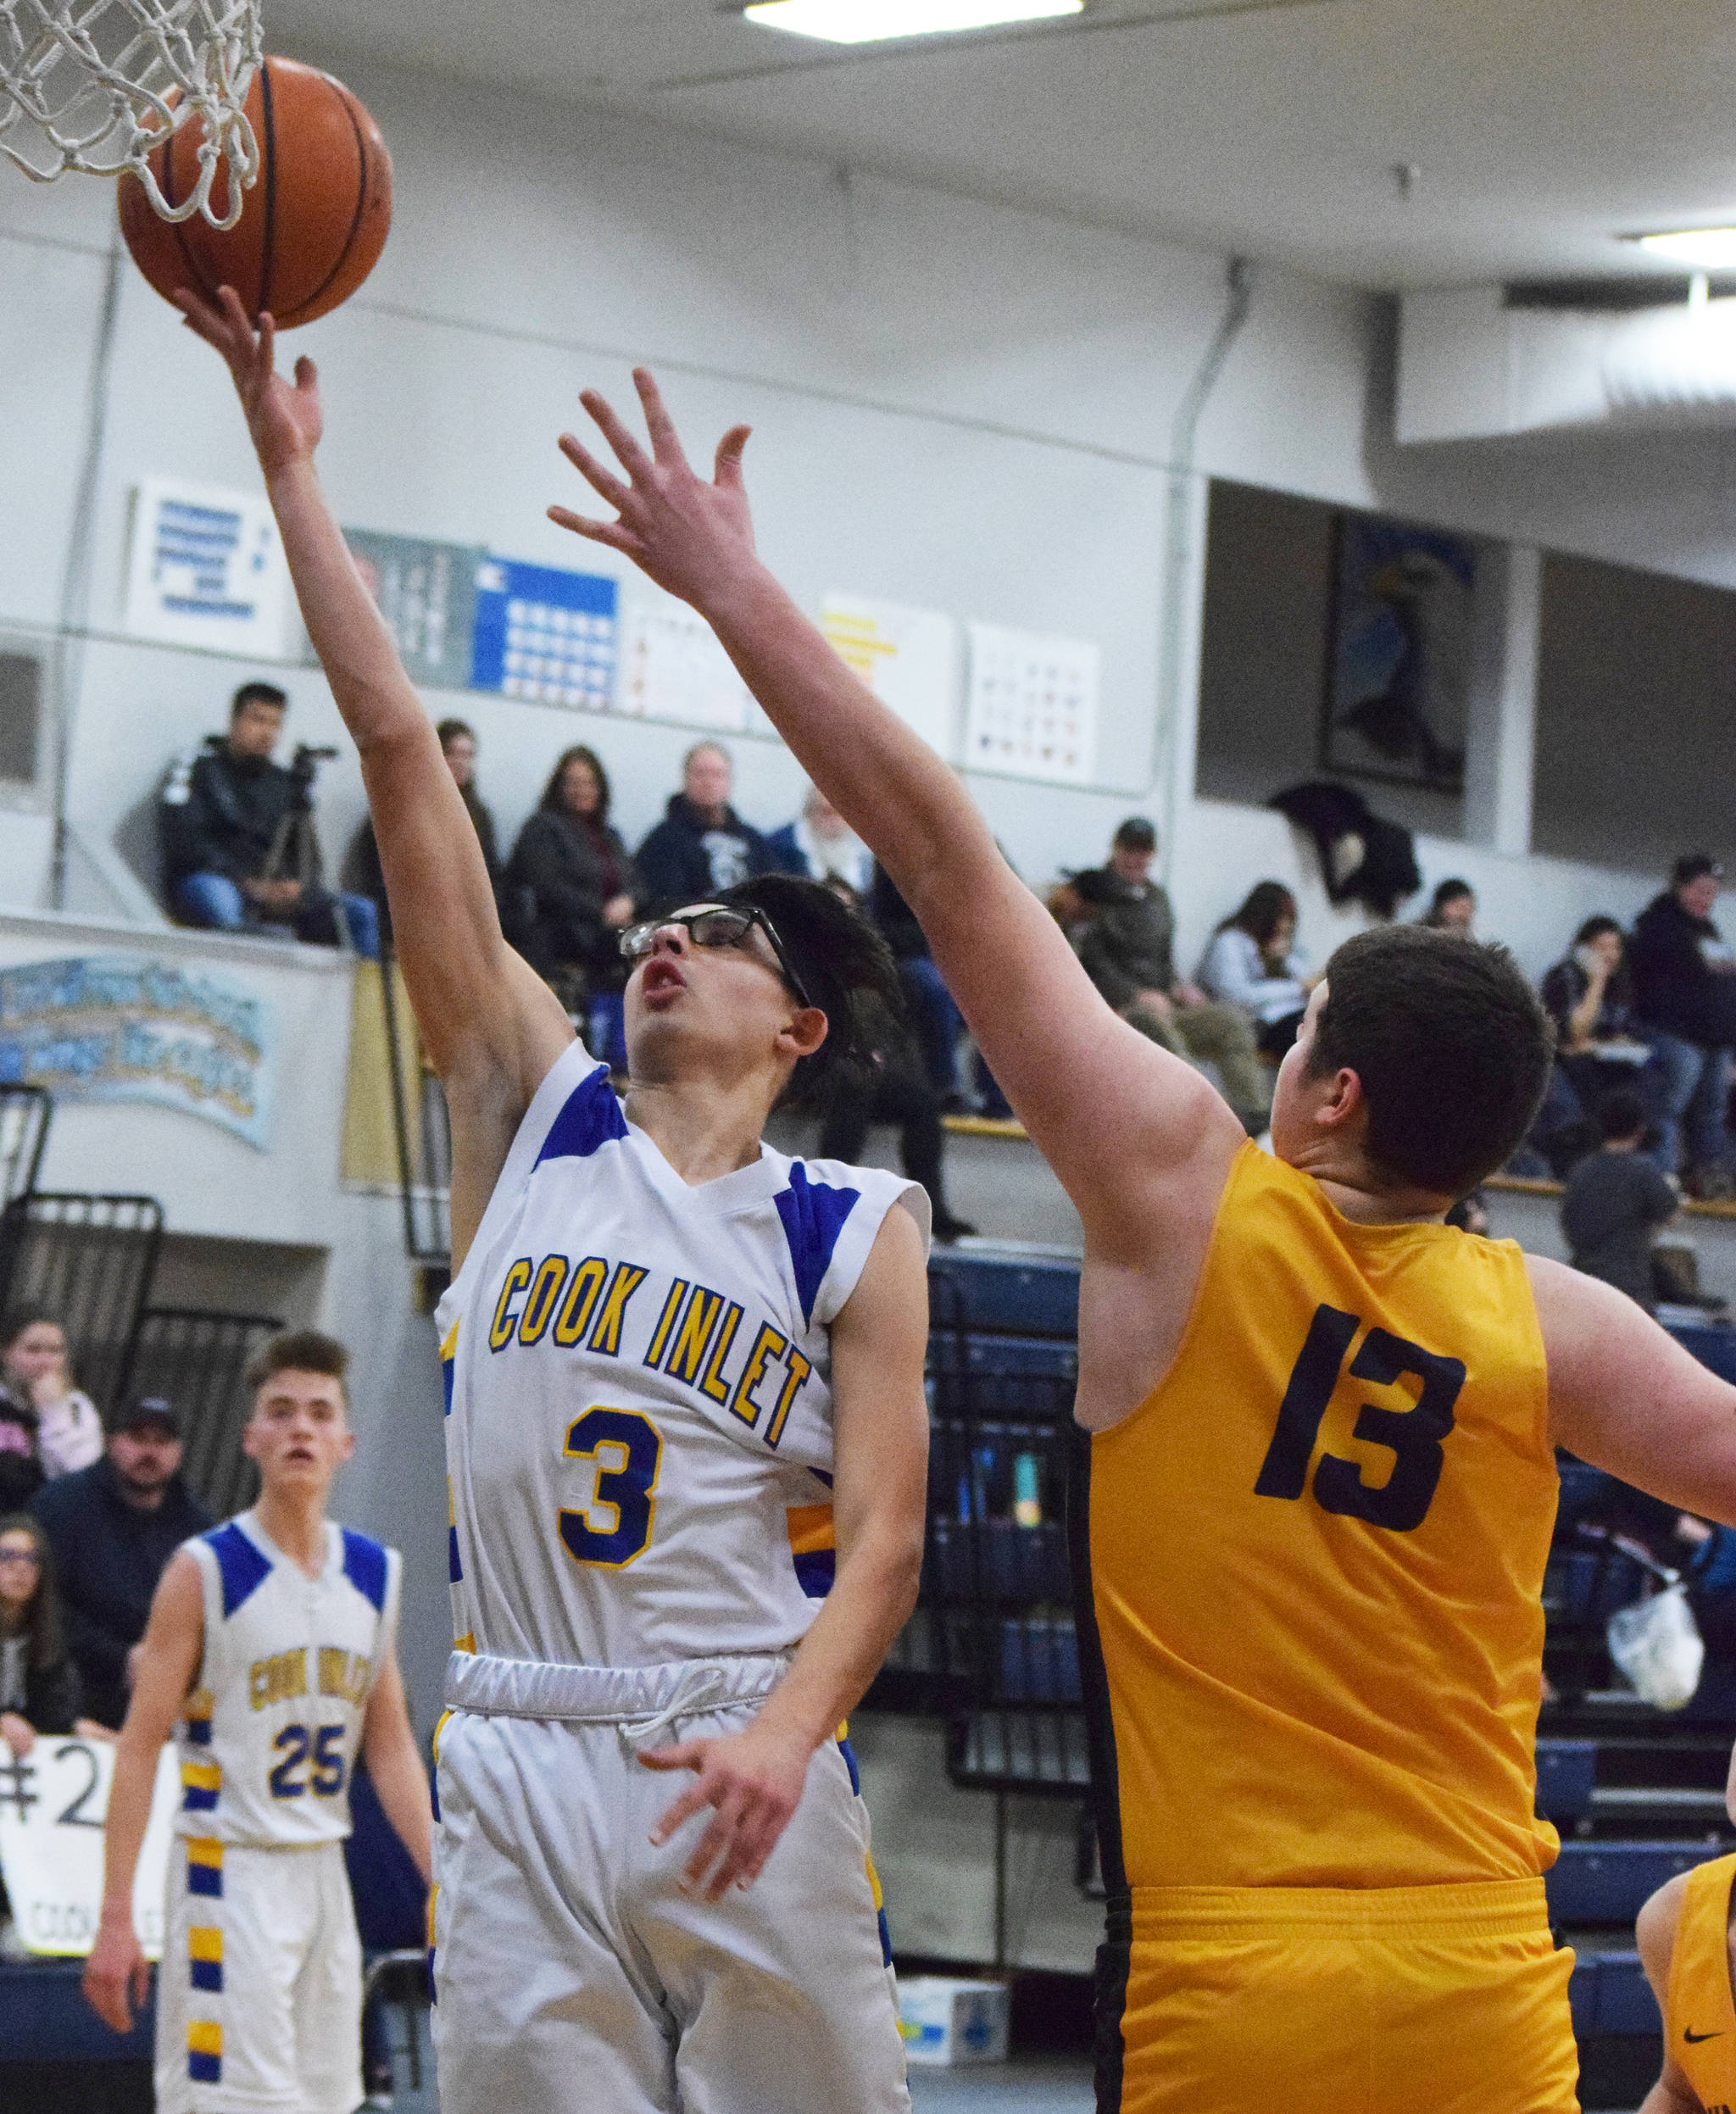 CIA’s Austin Matheson (3) gets past a block by Ninilchik’s Jake Clark, Tuesday, Jan. 7, 2020, at Cook Inlet Academy in Soldotna, Alaska. (Photo by Joey Klecka/Peninsula Clarion)